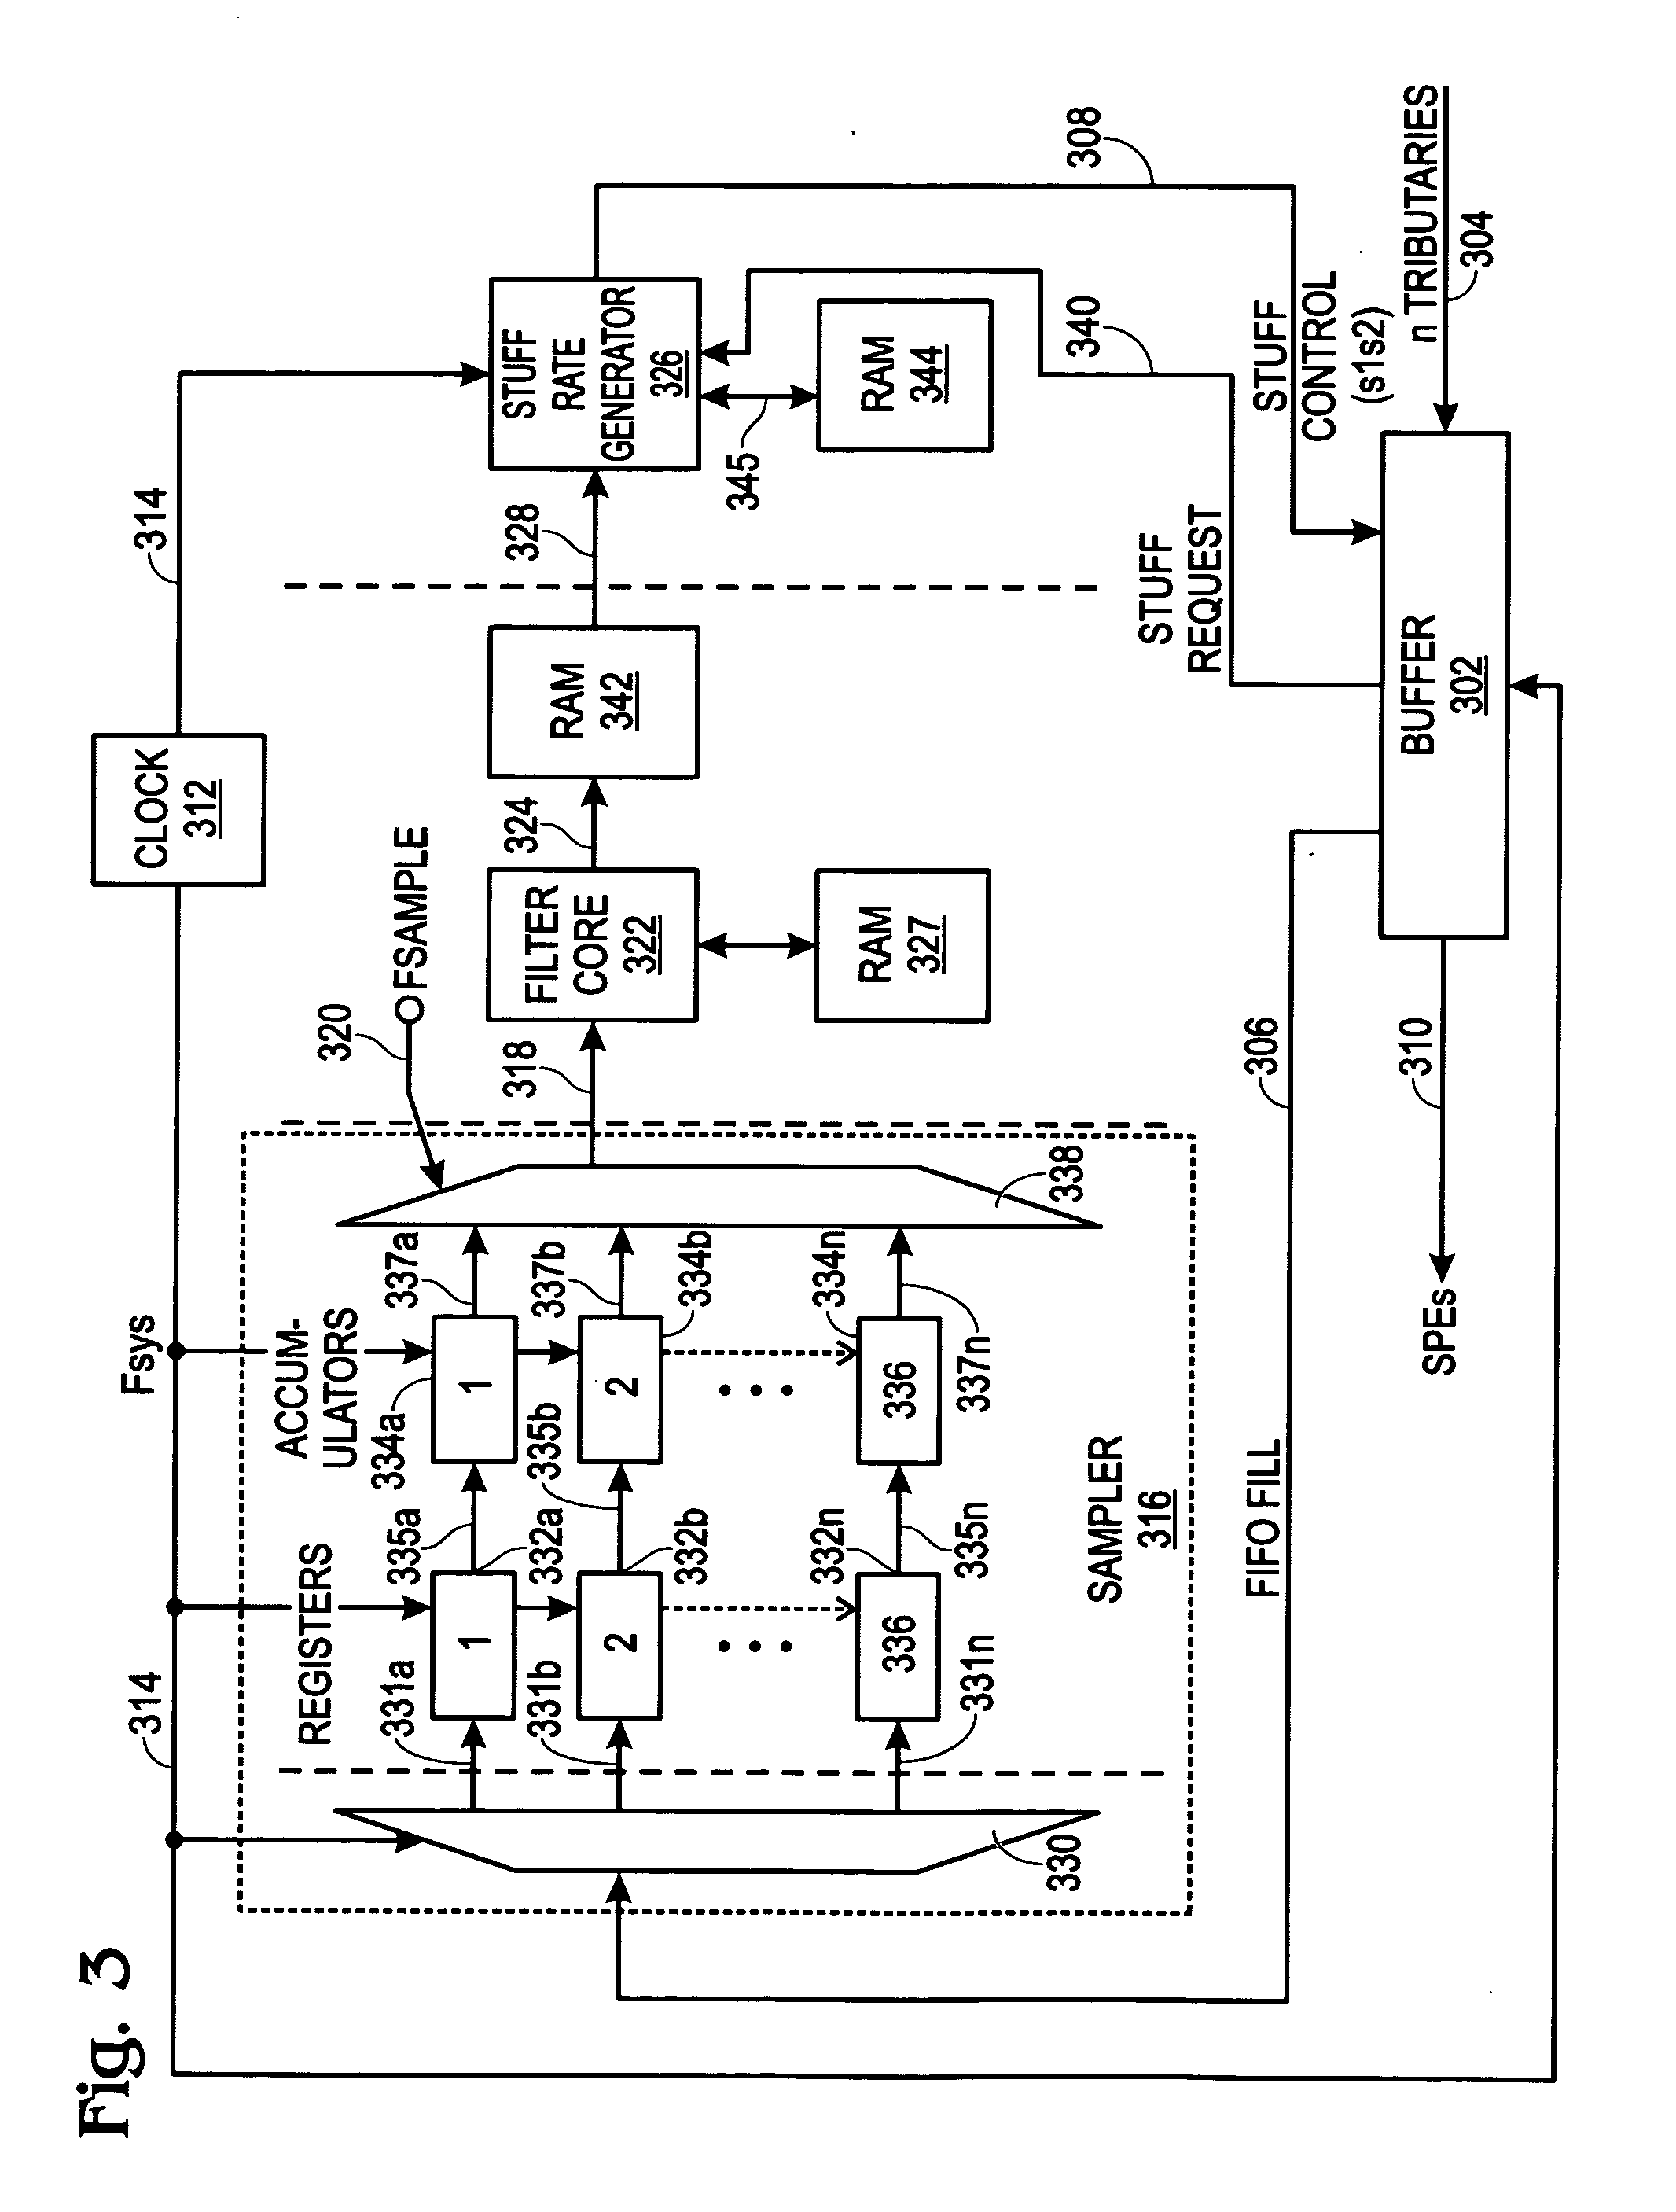 Timeshared jitter attenuator in multi-channel mapping applications